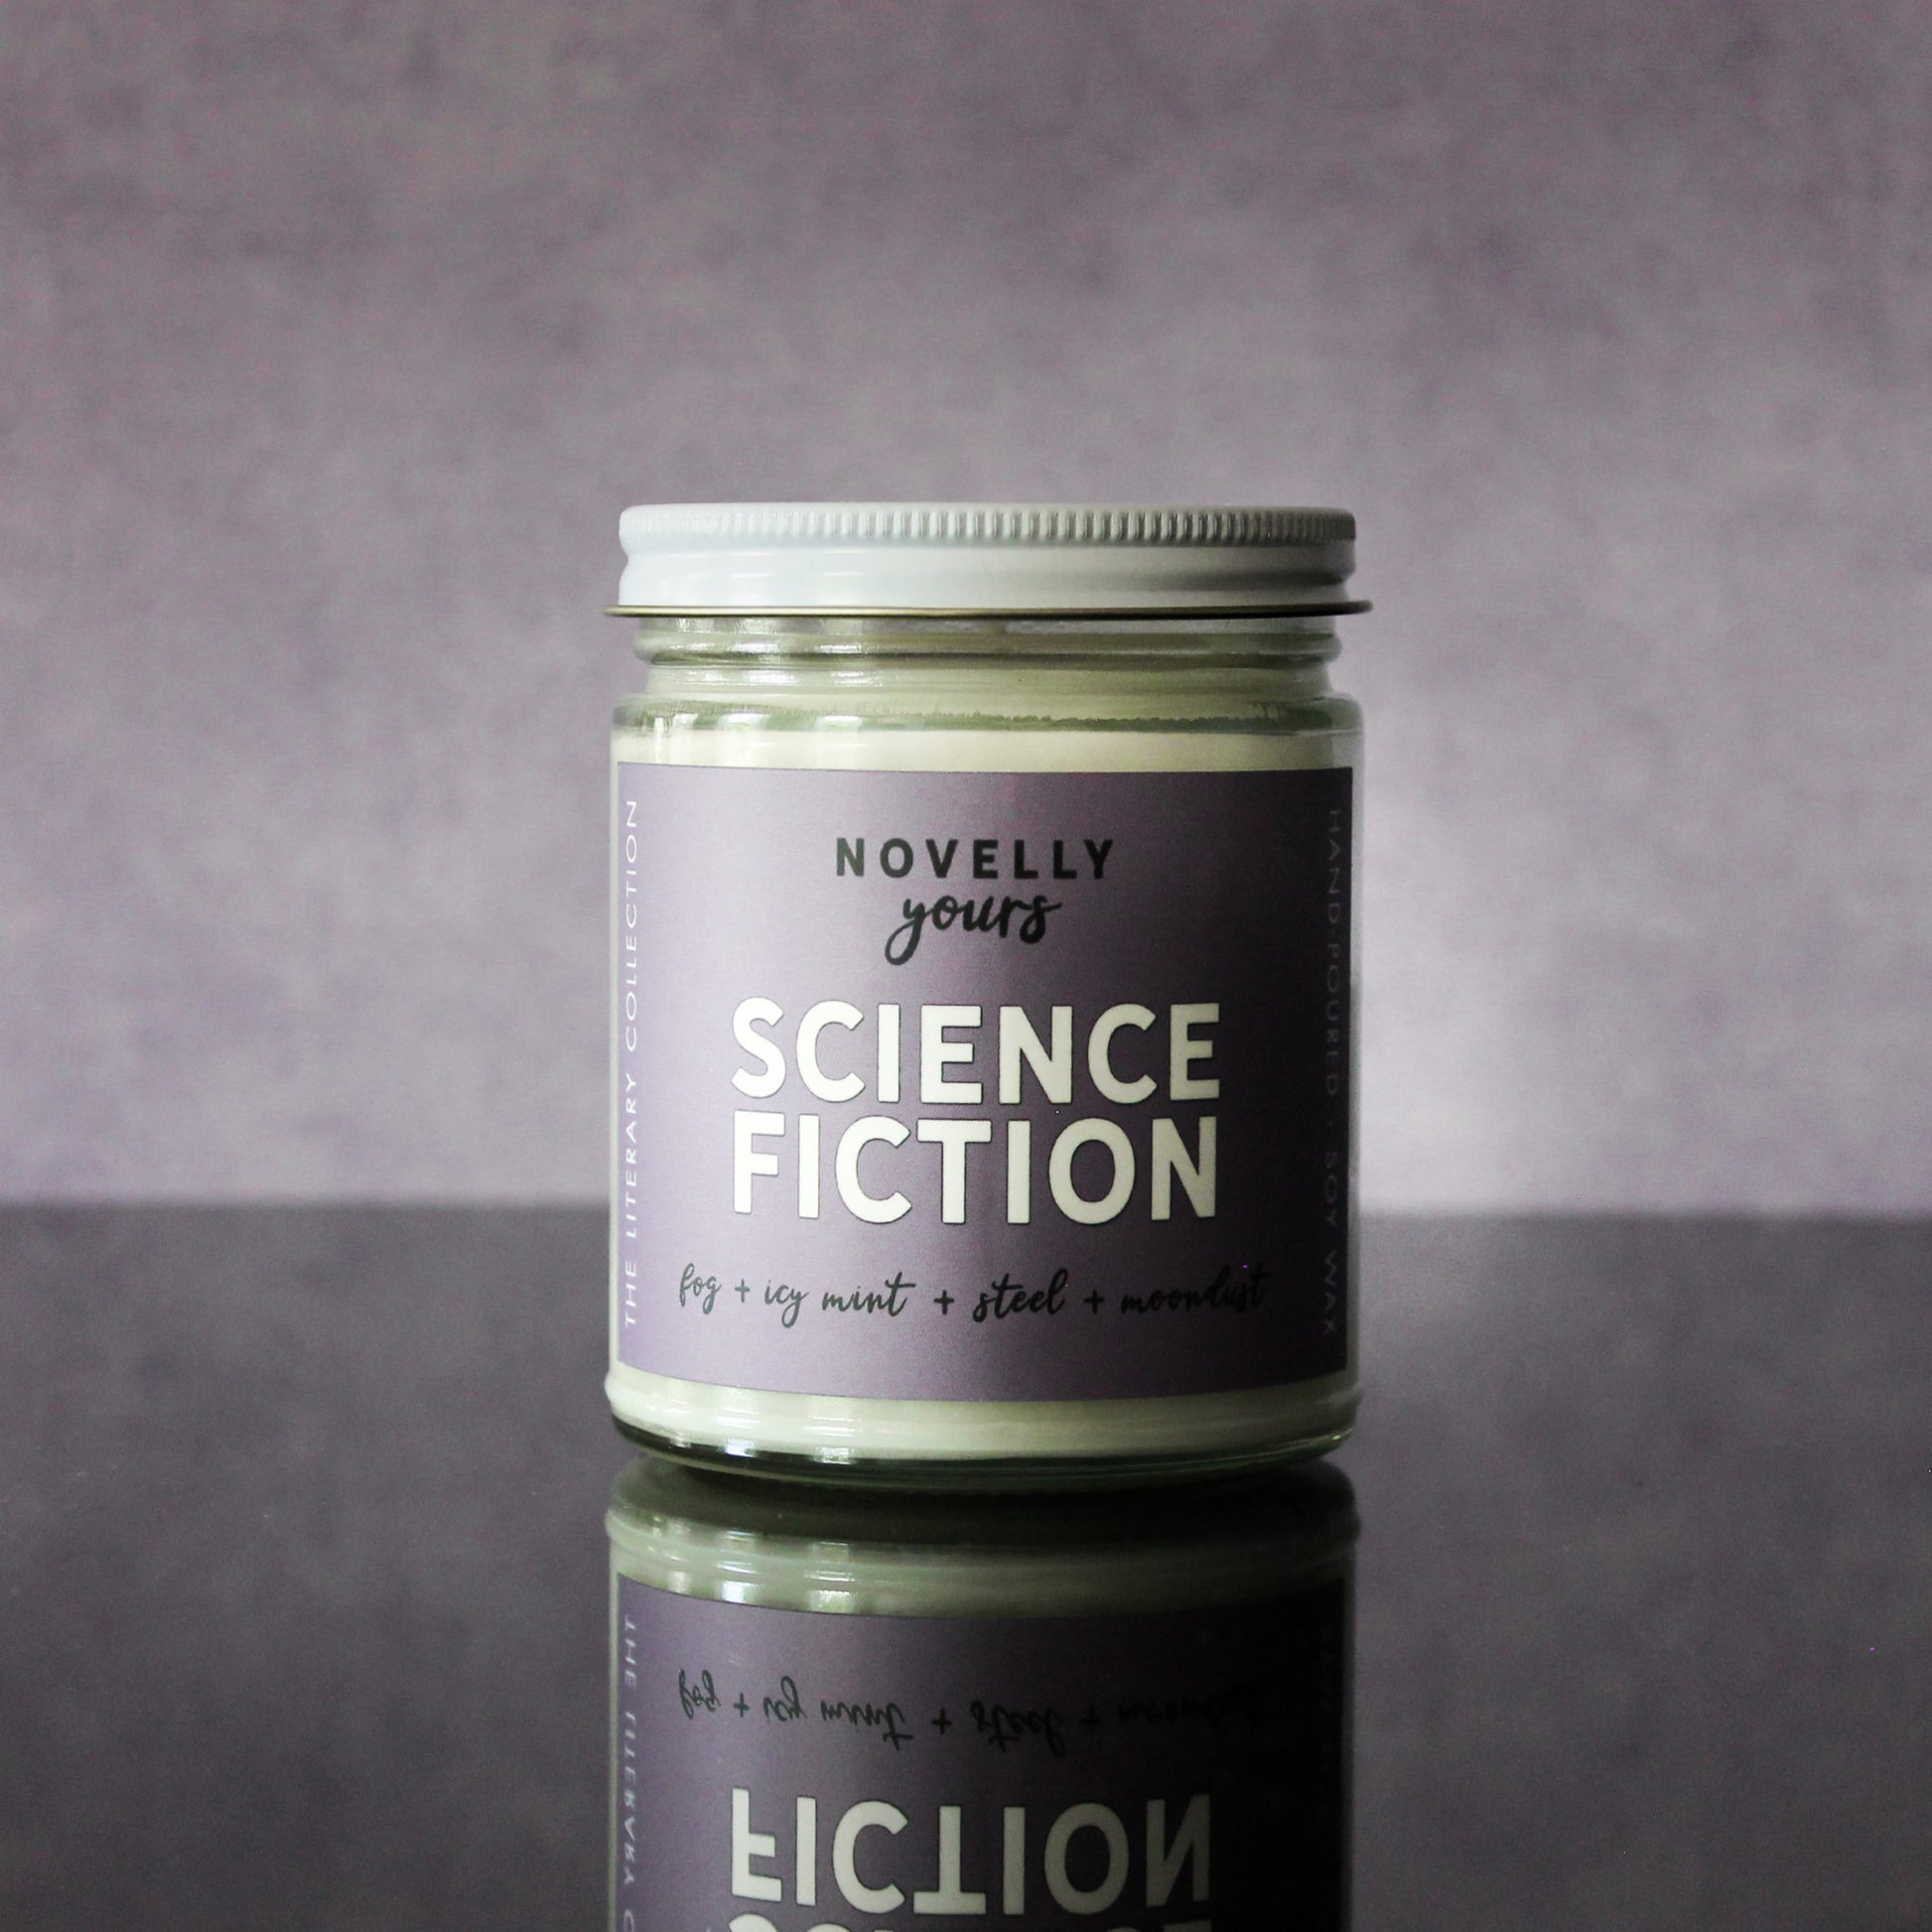 scented soy wax candle labeled "Science Fiction" sitting against a purple background on a black reflective base